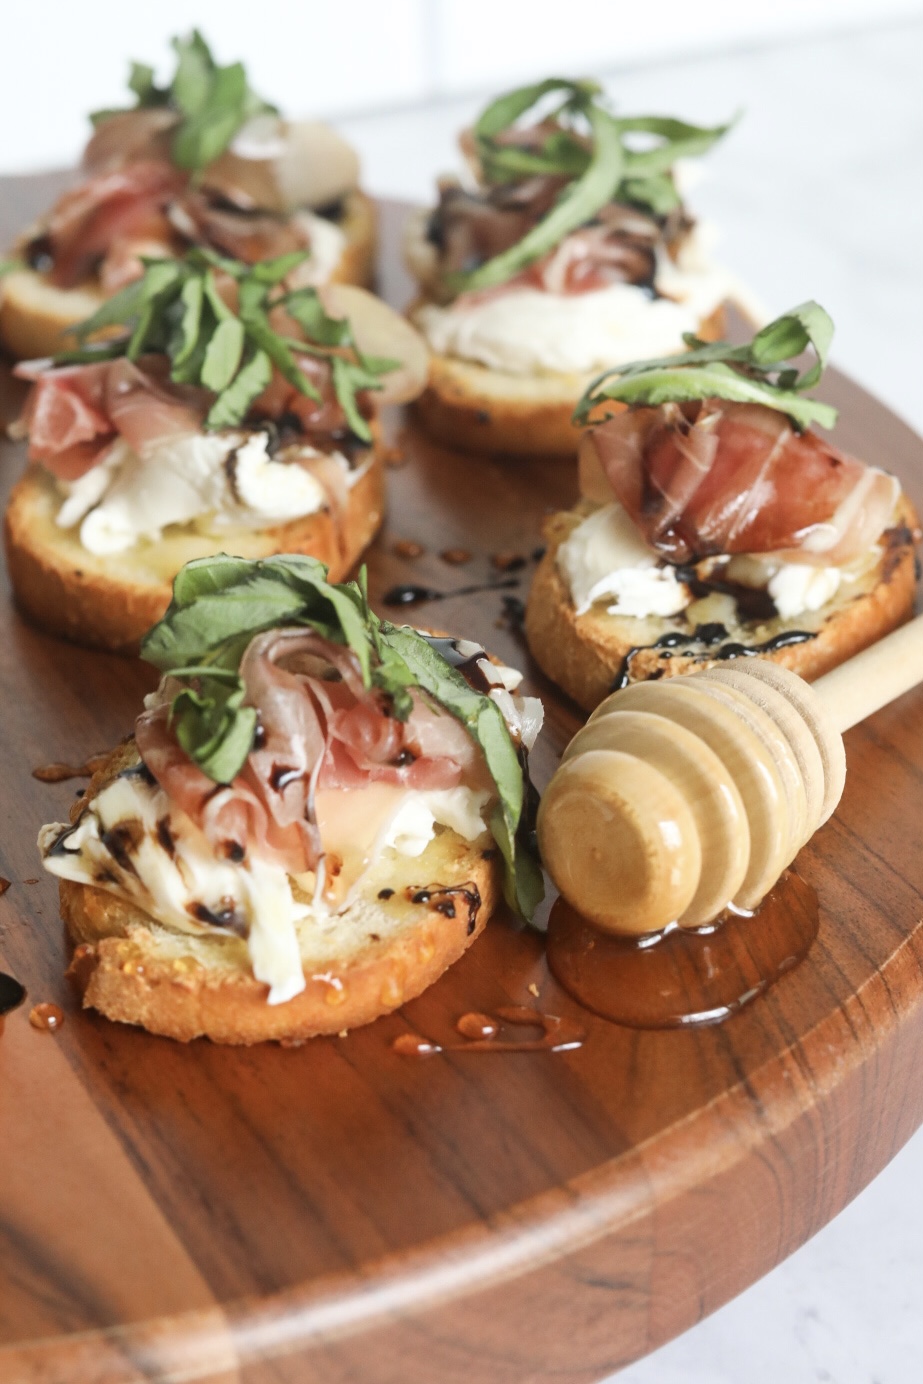 Italian toast with burrata, prosciutto, balsamic glaze, honey and fresh basil. Toast points are on a wooden cutting board. Honey dipper added for styling purposes.